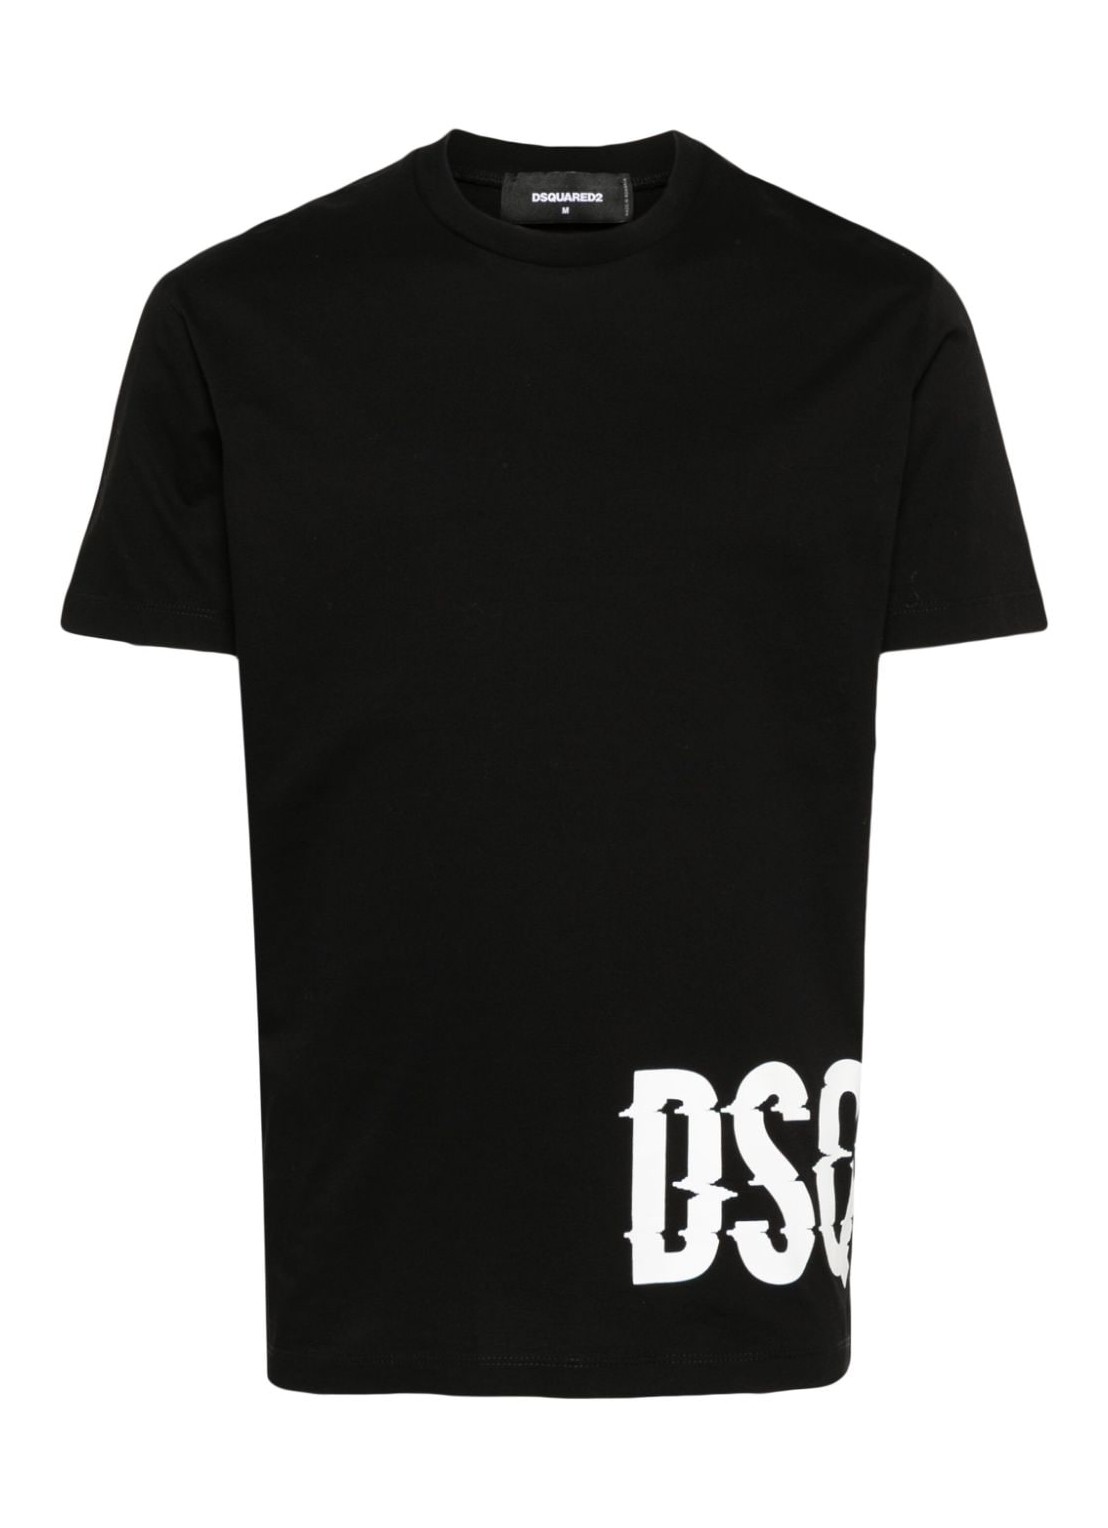 Camiseta dsquared t-shirt man cool fit tee s74gd1261s23009 900 talla negro
 